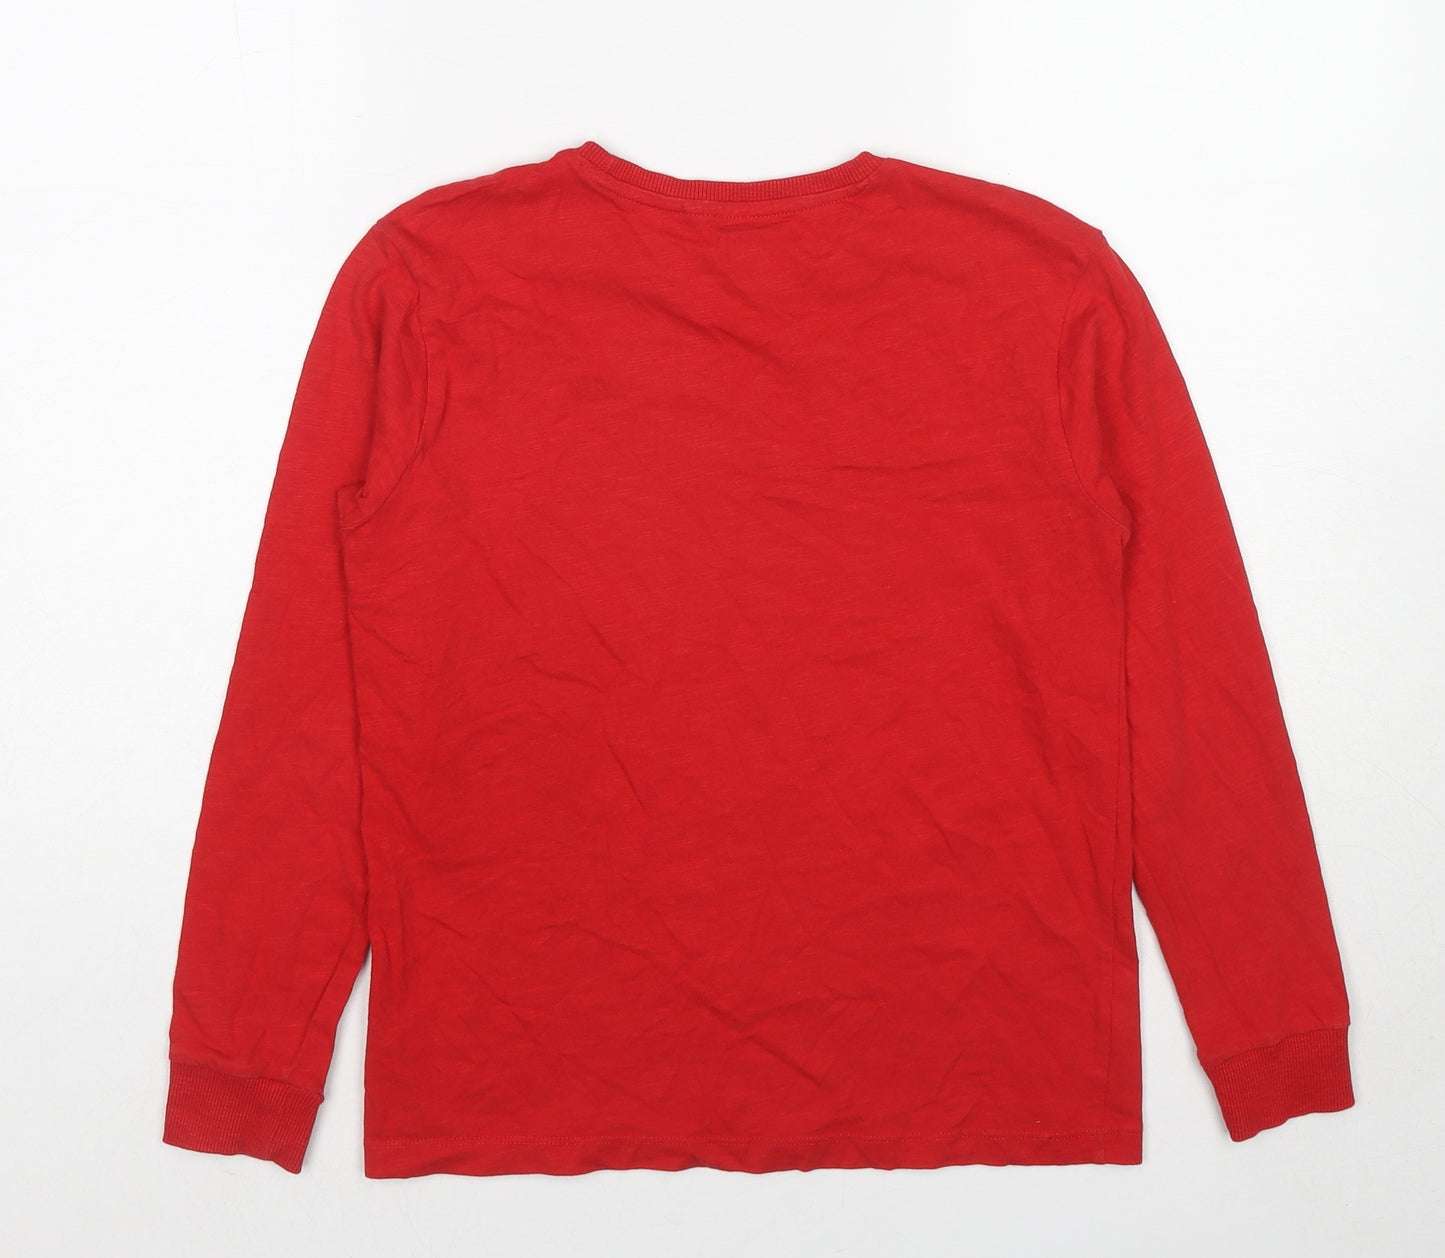 NEXT Boys Red Cotton Basic T-Shirt Size 10 Years Round Neck Pullover - Christmas Emoji